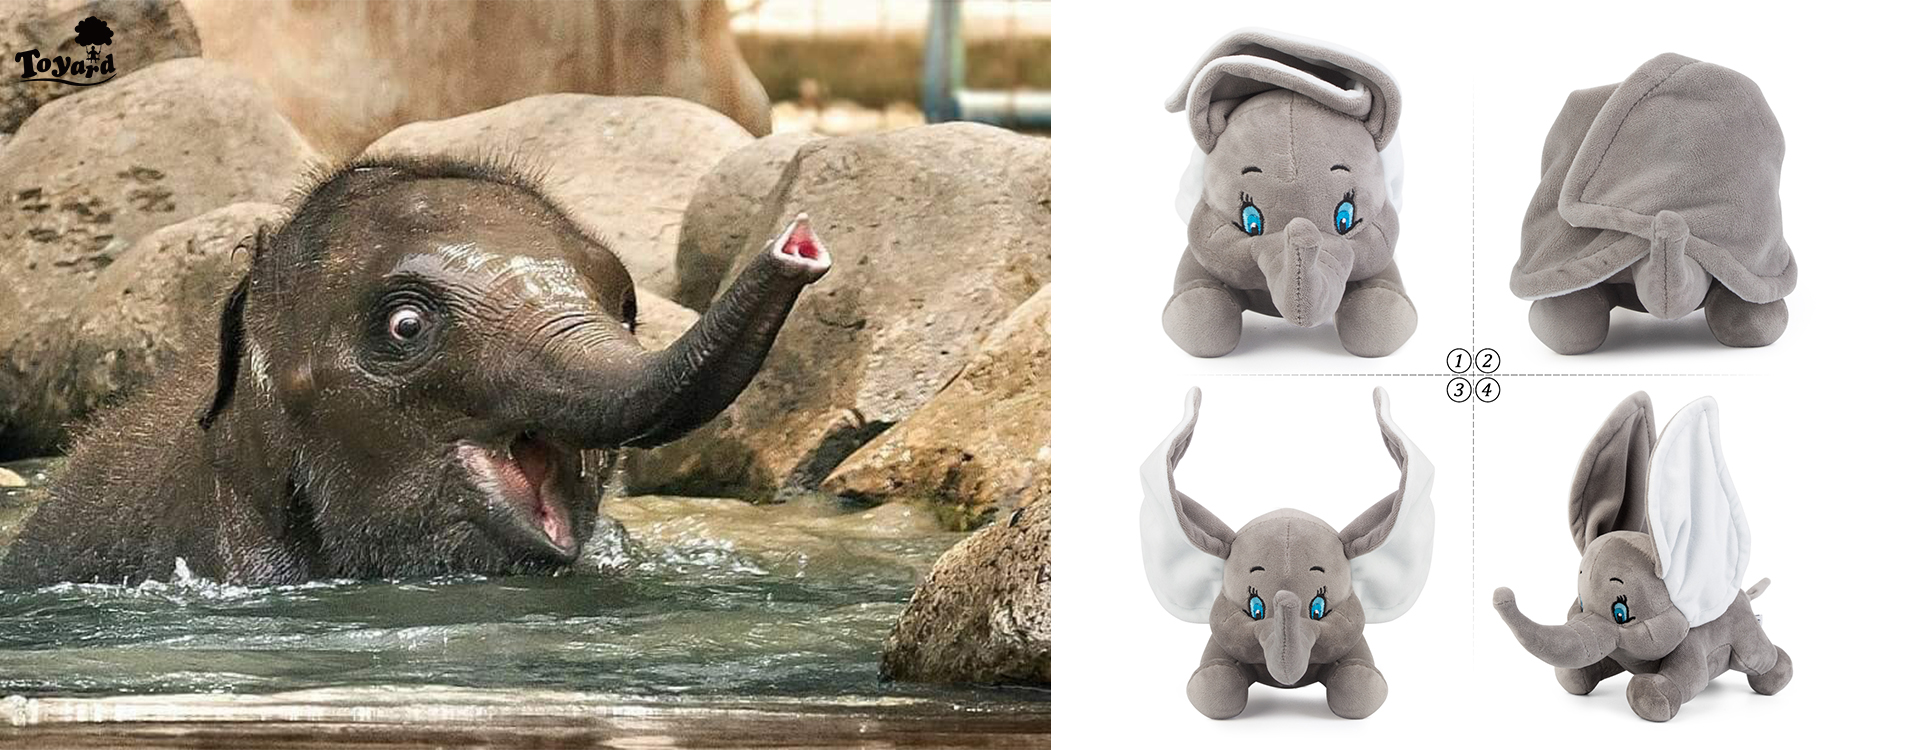 cute elephants toy design by the real small elephant